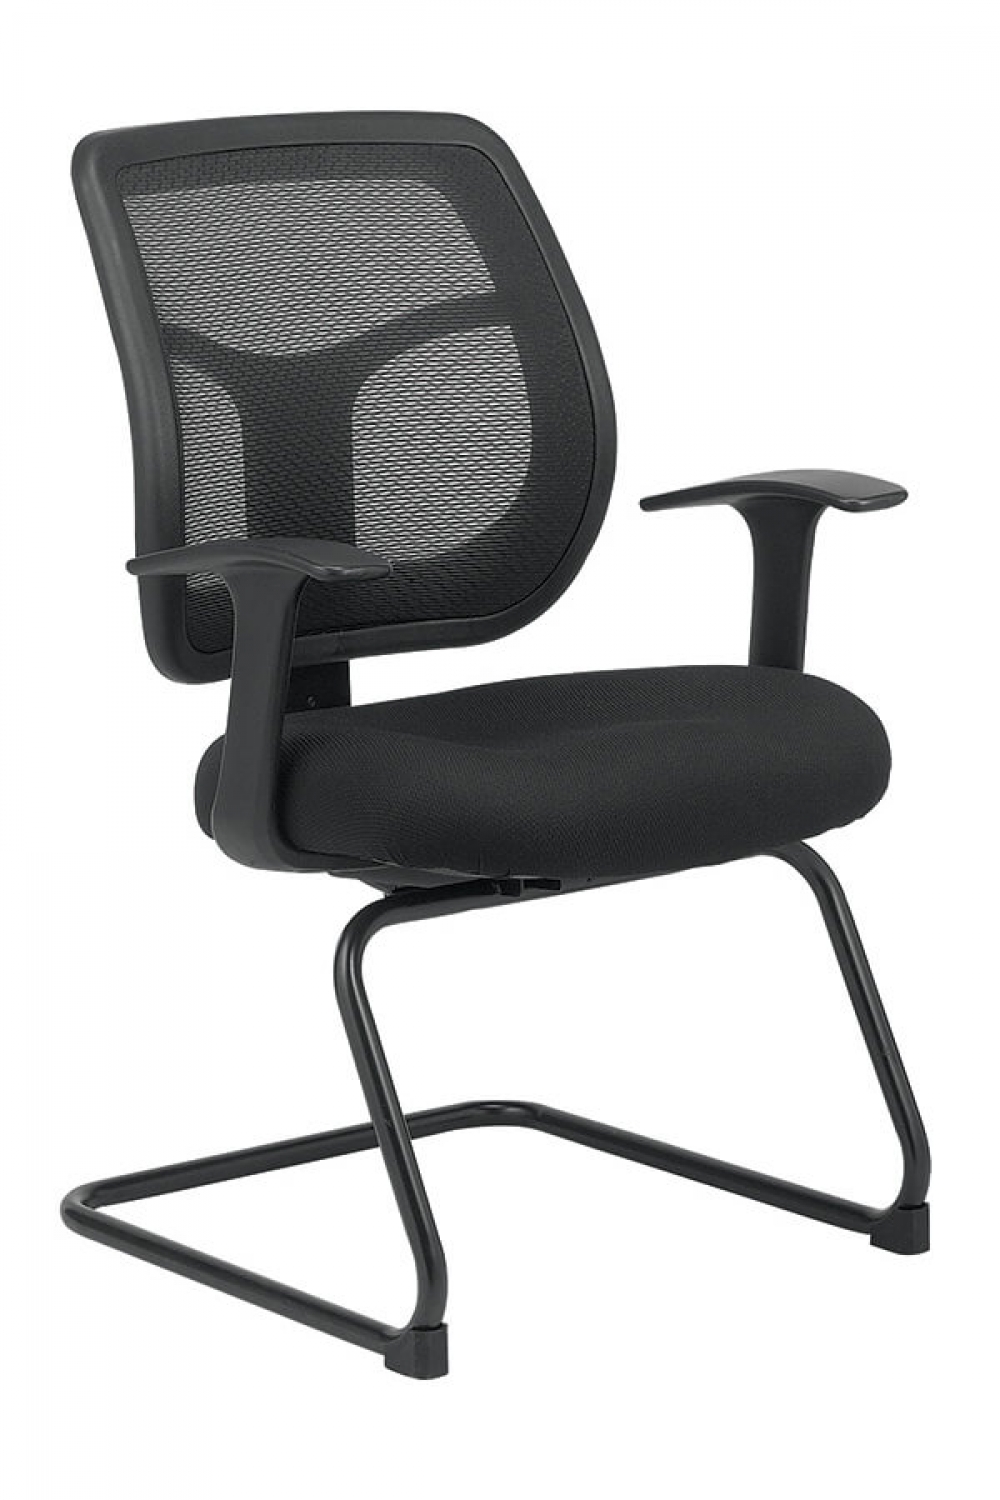 office-furniture-chairs-guest-office-chairs.jpg